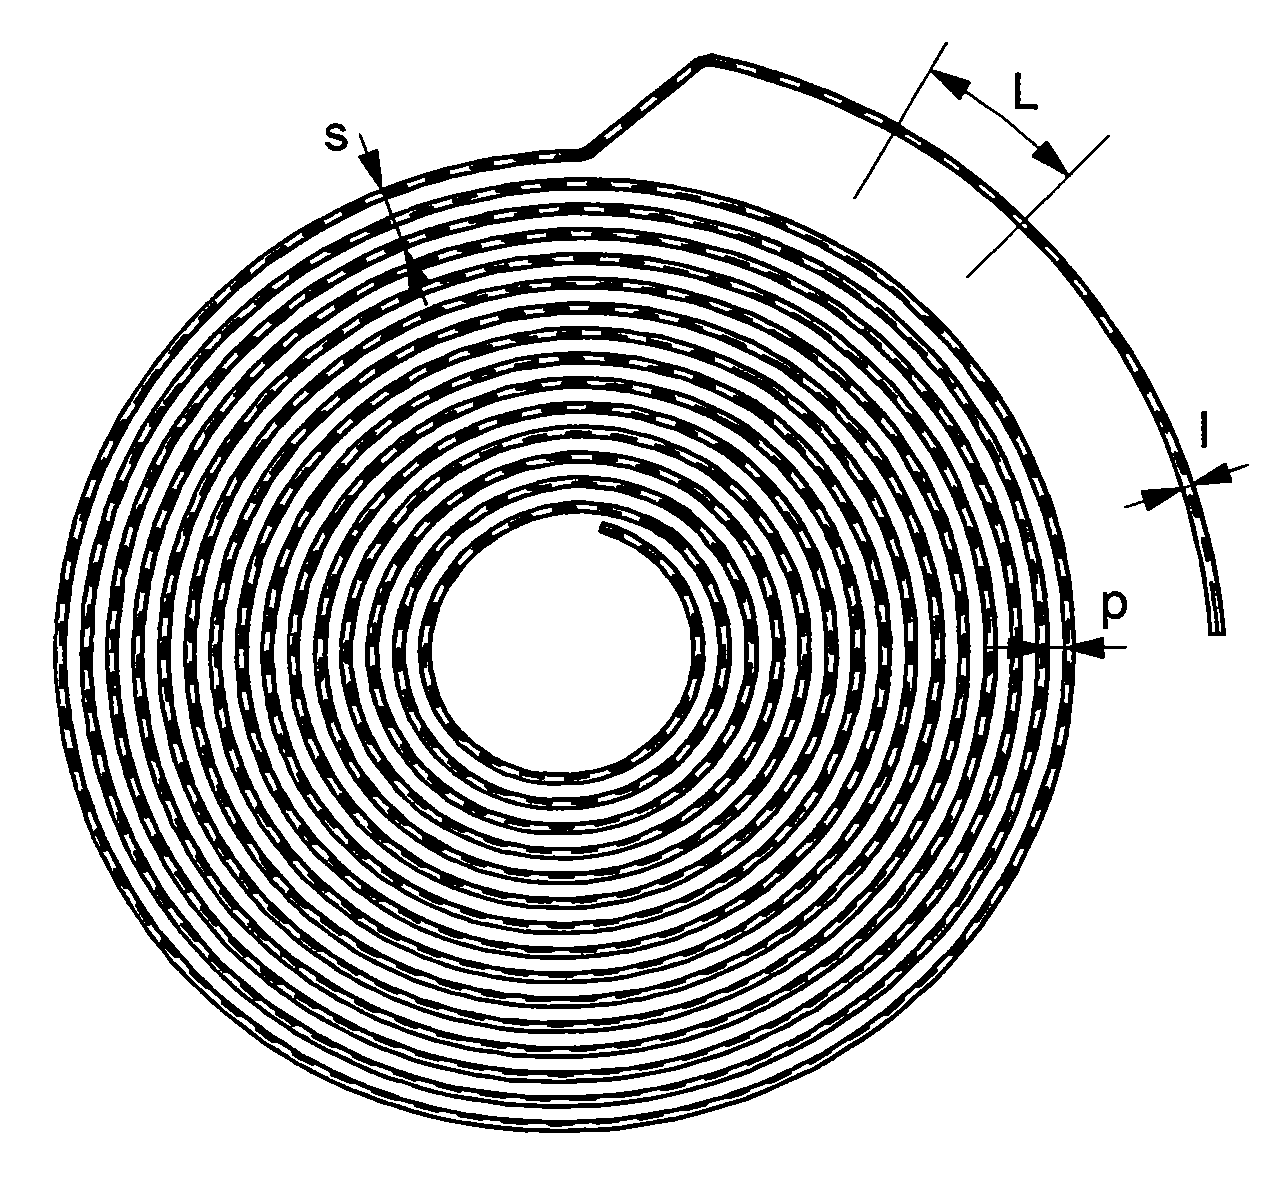 Spiral spring made of athermal glass for clockwork movement and method for making same